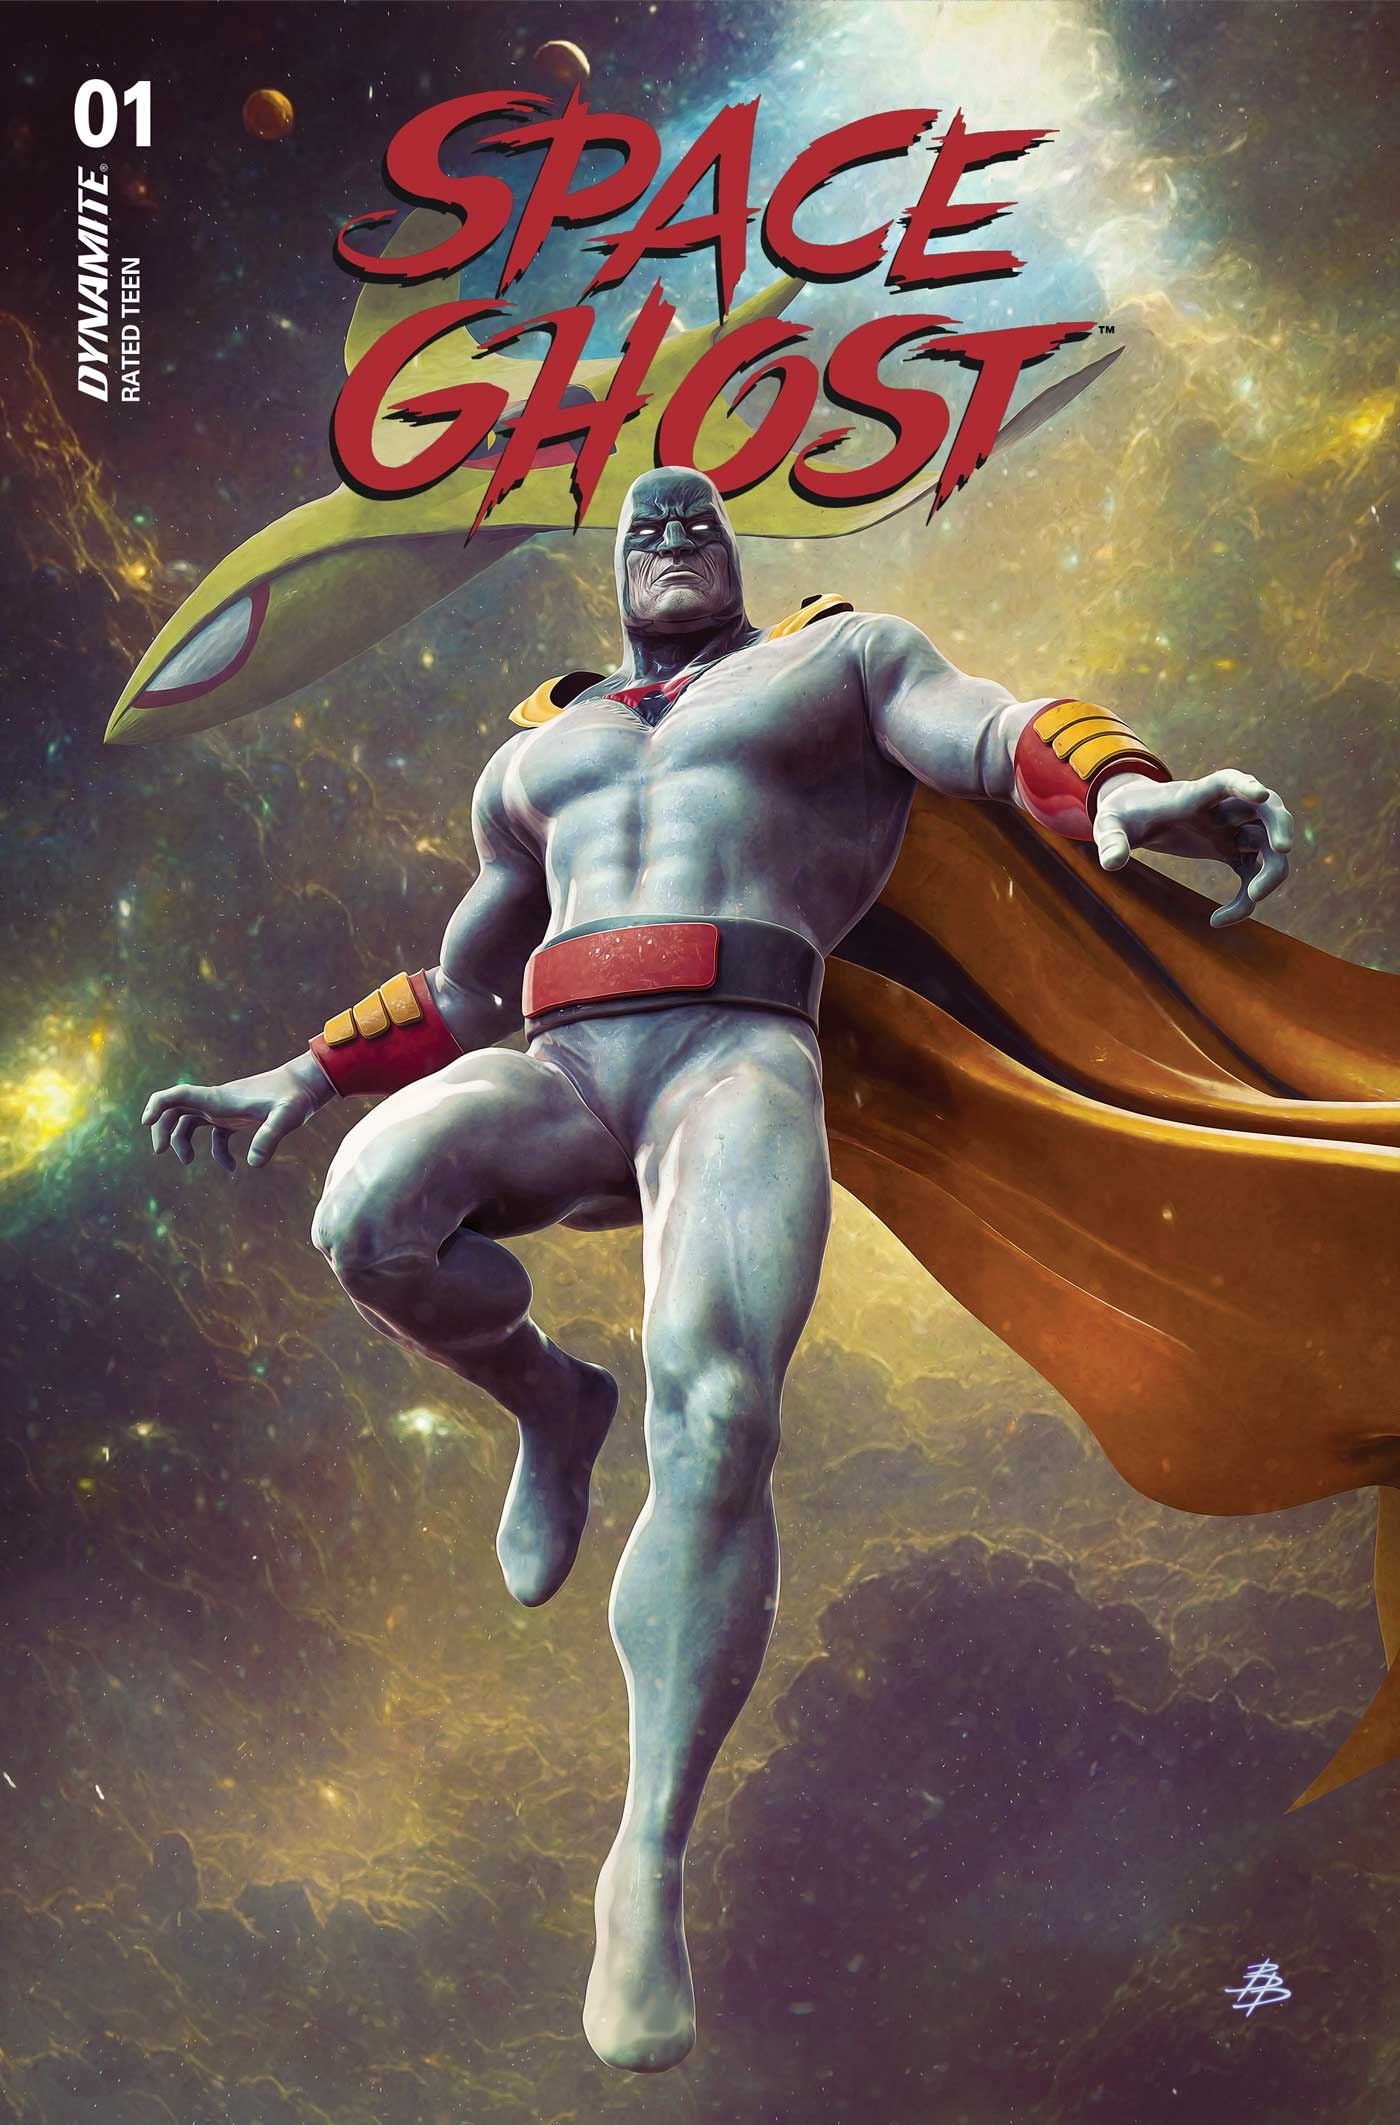 Space Ghost “Decimates His Enemies” In Grim Preview For New Series